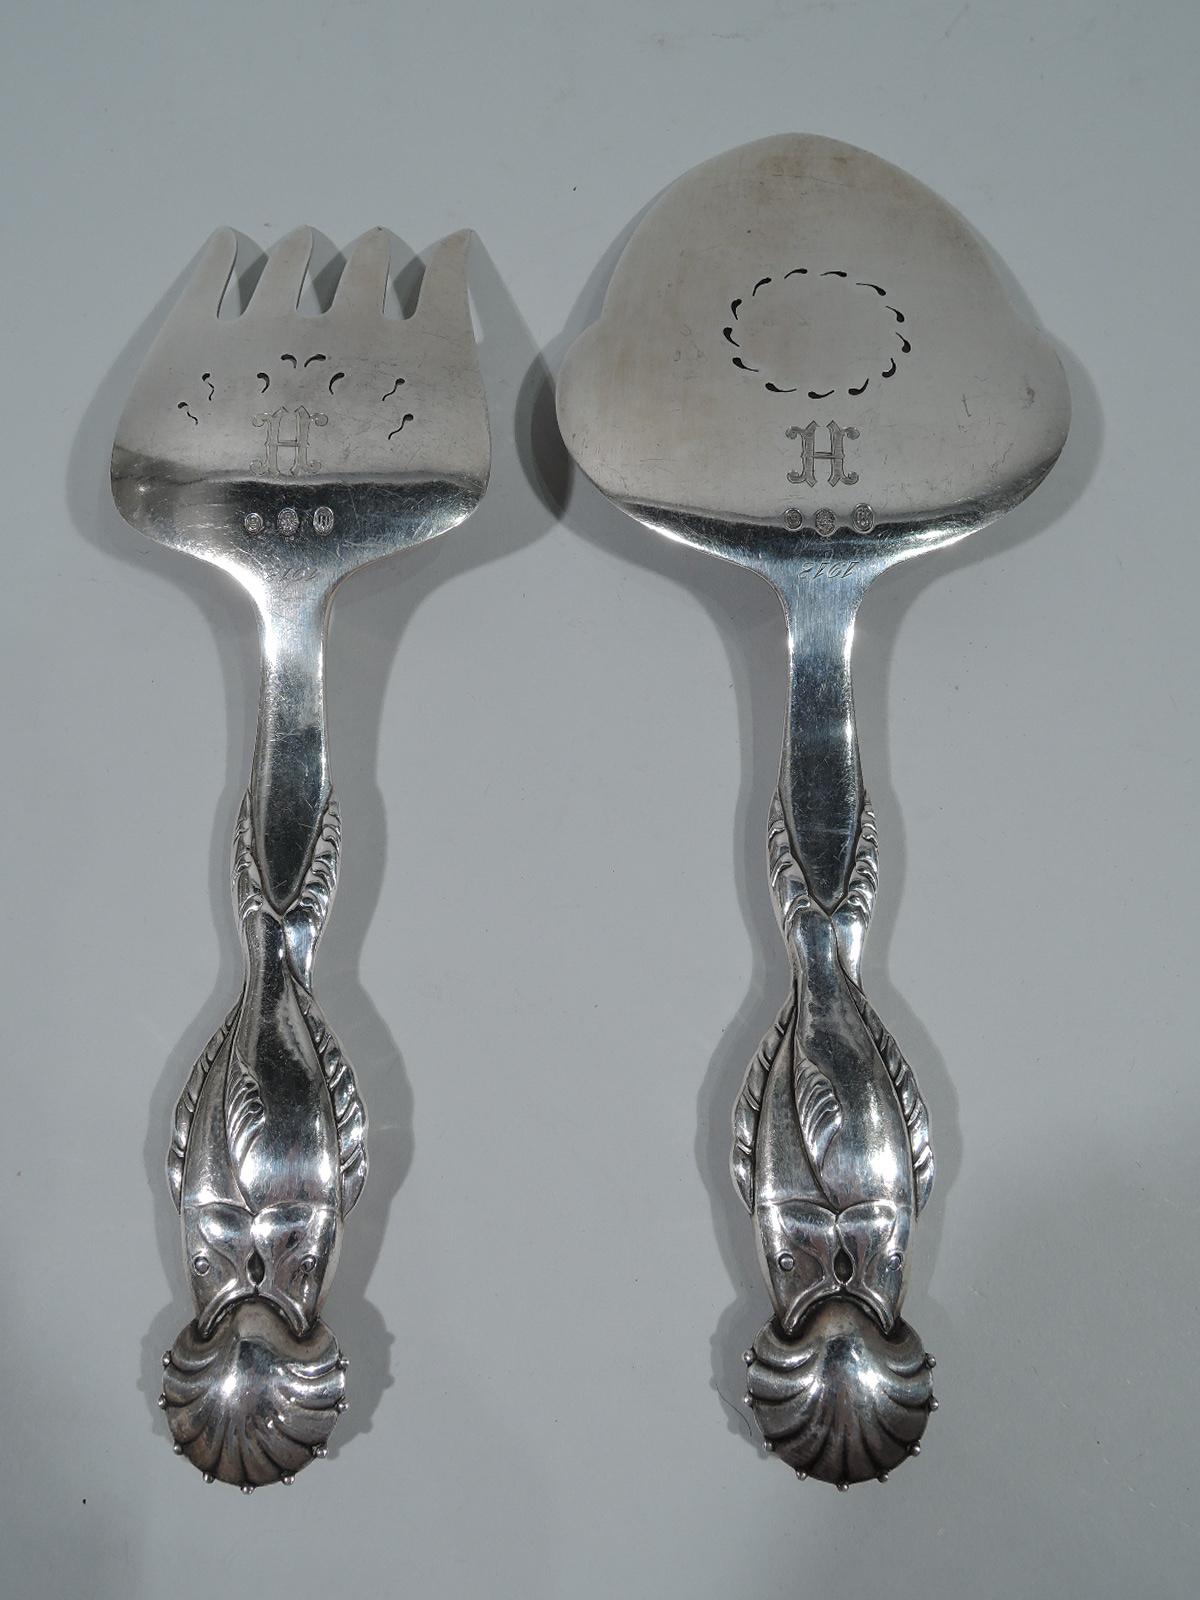 Early 830 fish serving slice and fork. Made by Georg Jensen in Copenhagen in 1925.

Each: Double-sided figural handle with entwined fish merging to form single split tail, and open mouths swallowing scallop shell terminal. Fork has curved shank